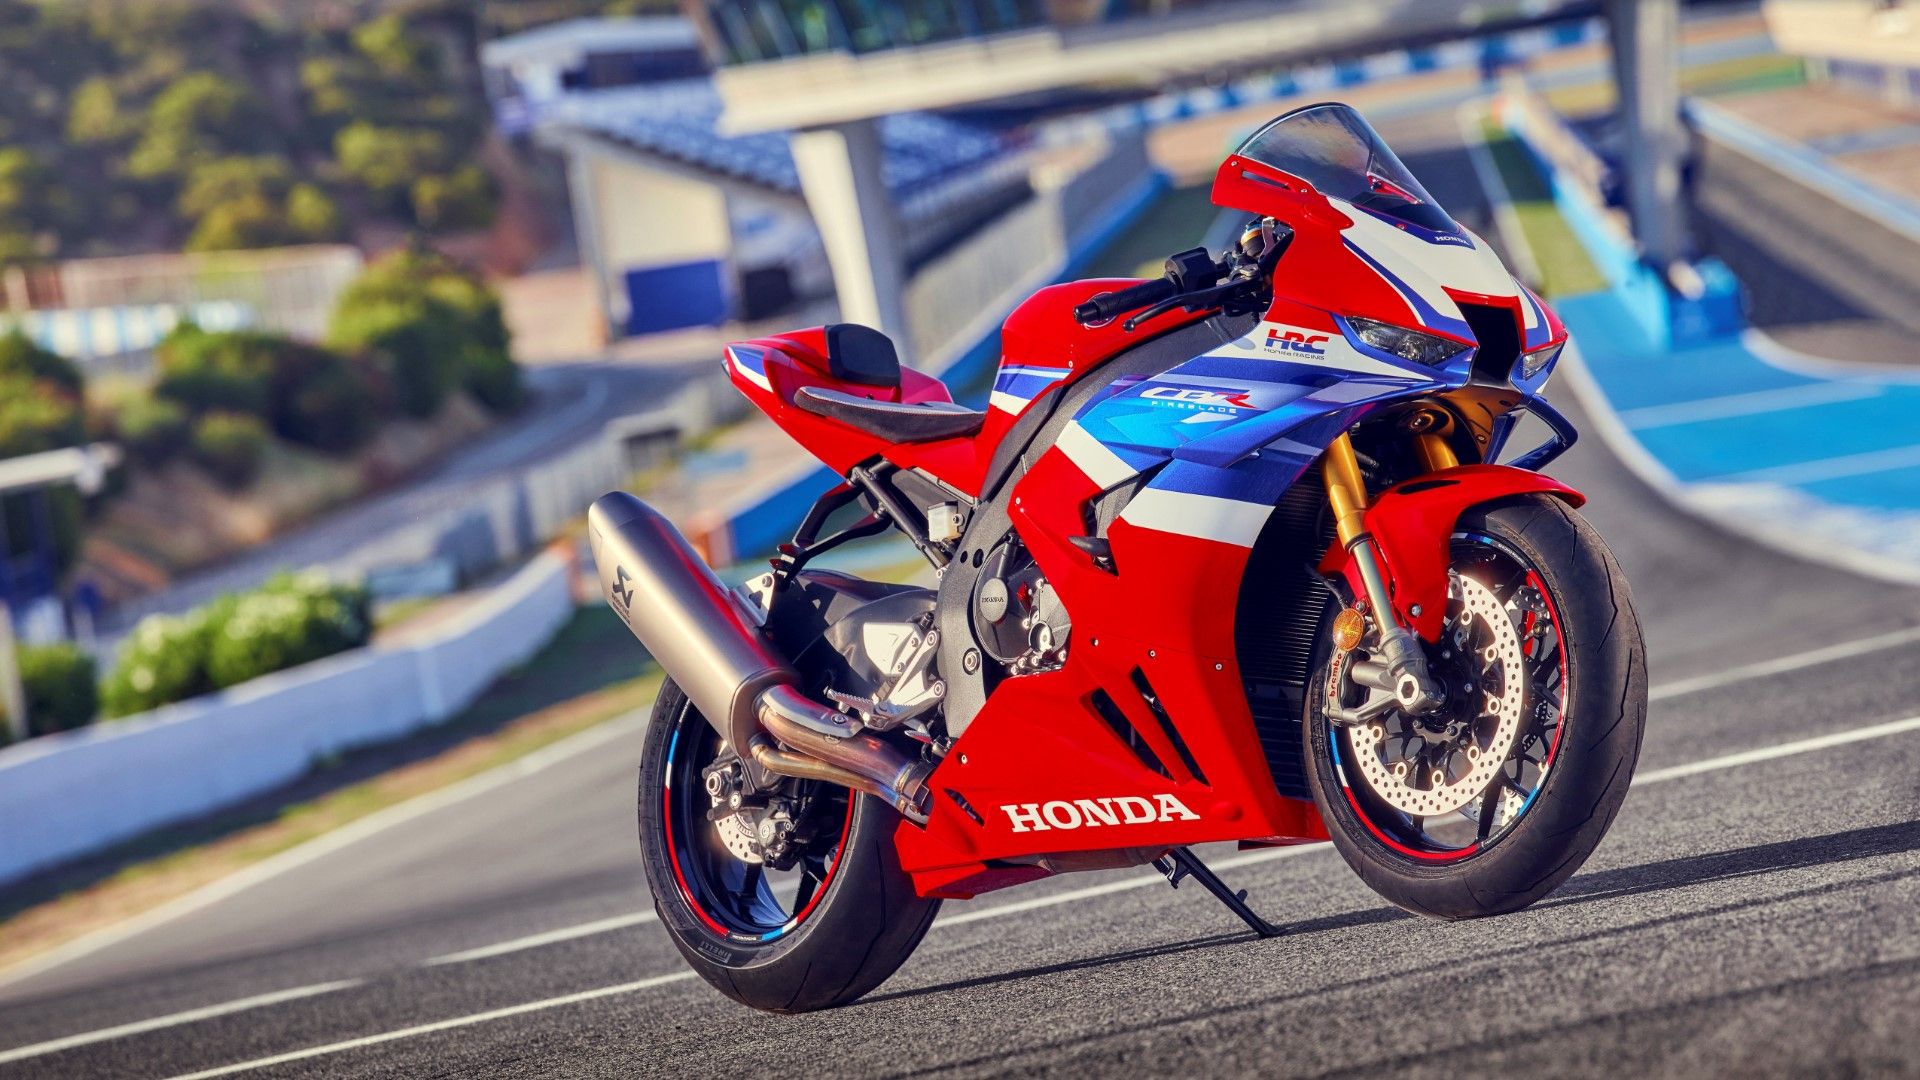 10 Sports Bikes So Perfect Aftermarket Upgrades Should Be Illegal